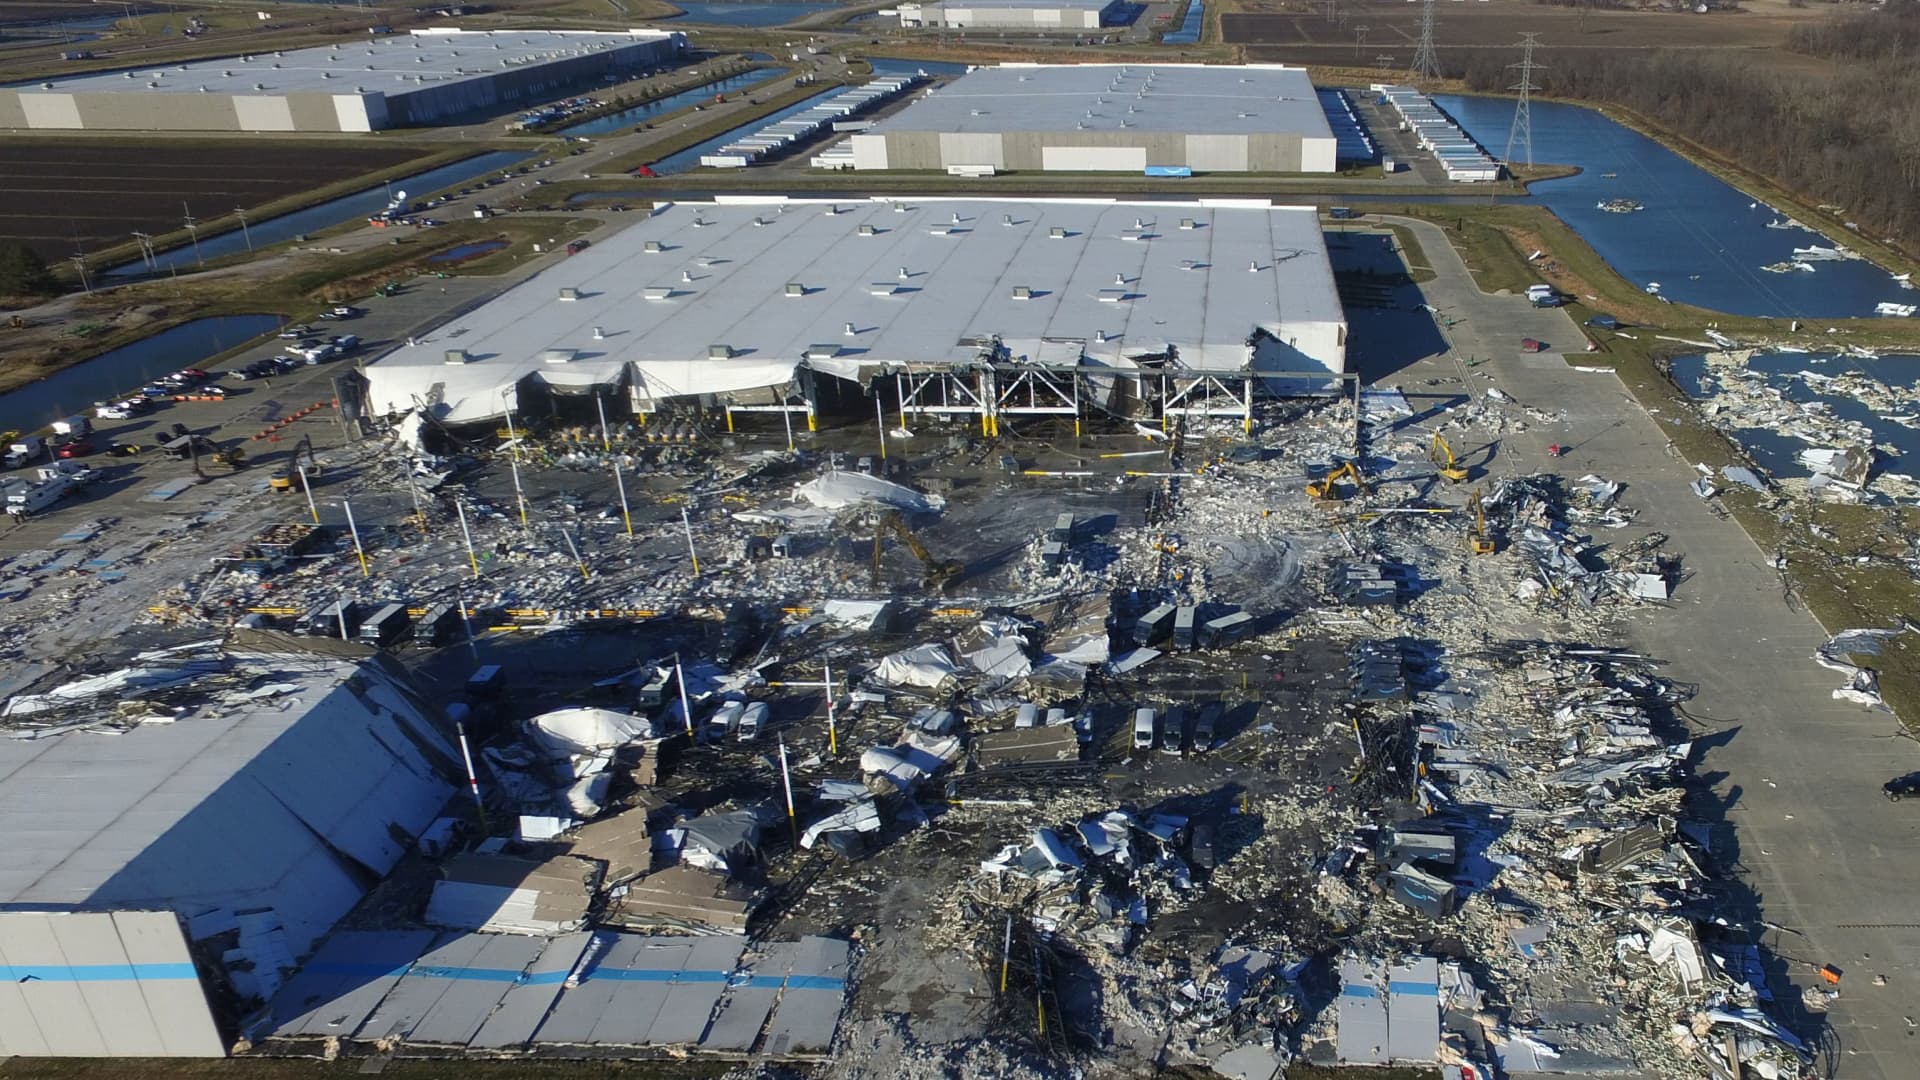 The site of a roof collapse at an Amazon.com distribution centre a day after a series of tornadoes dealt a blow to several U.S. states, in Edwardsville, Illinois, U.S. December 11, 2021.